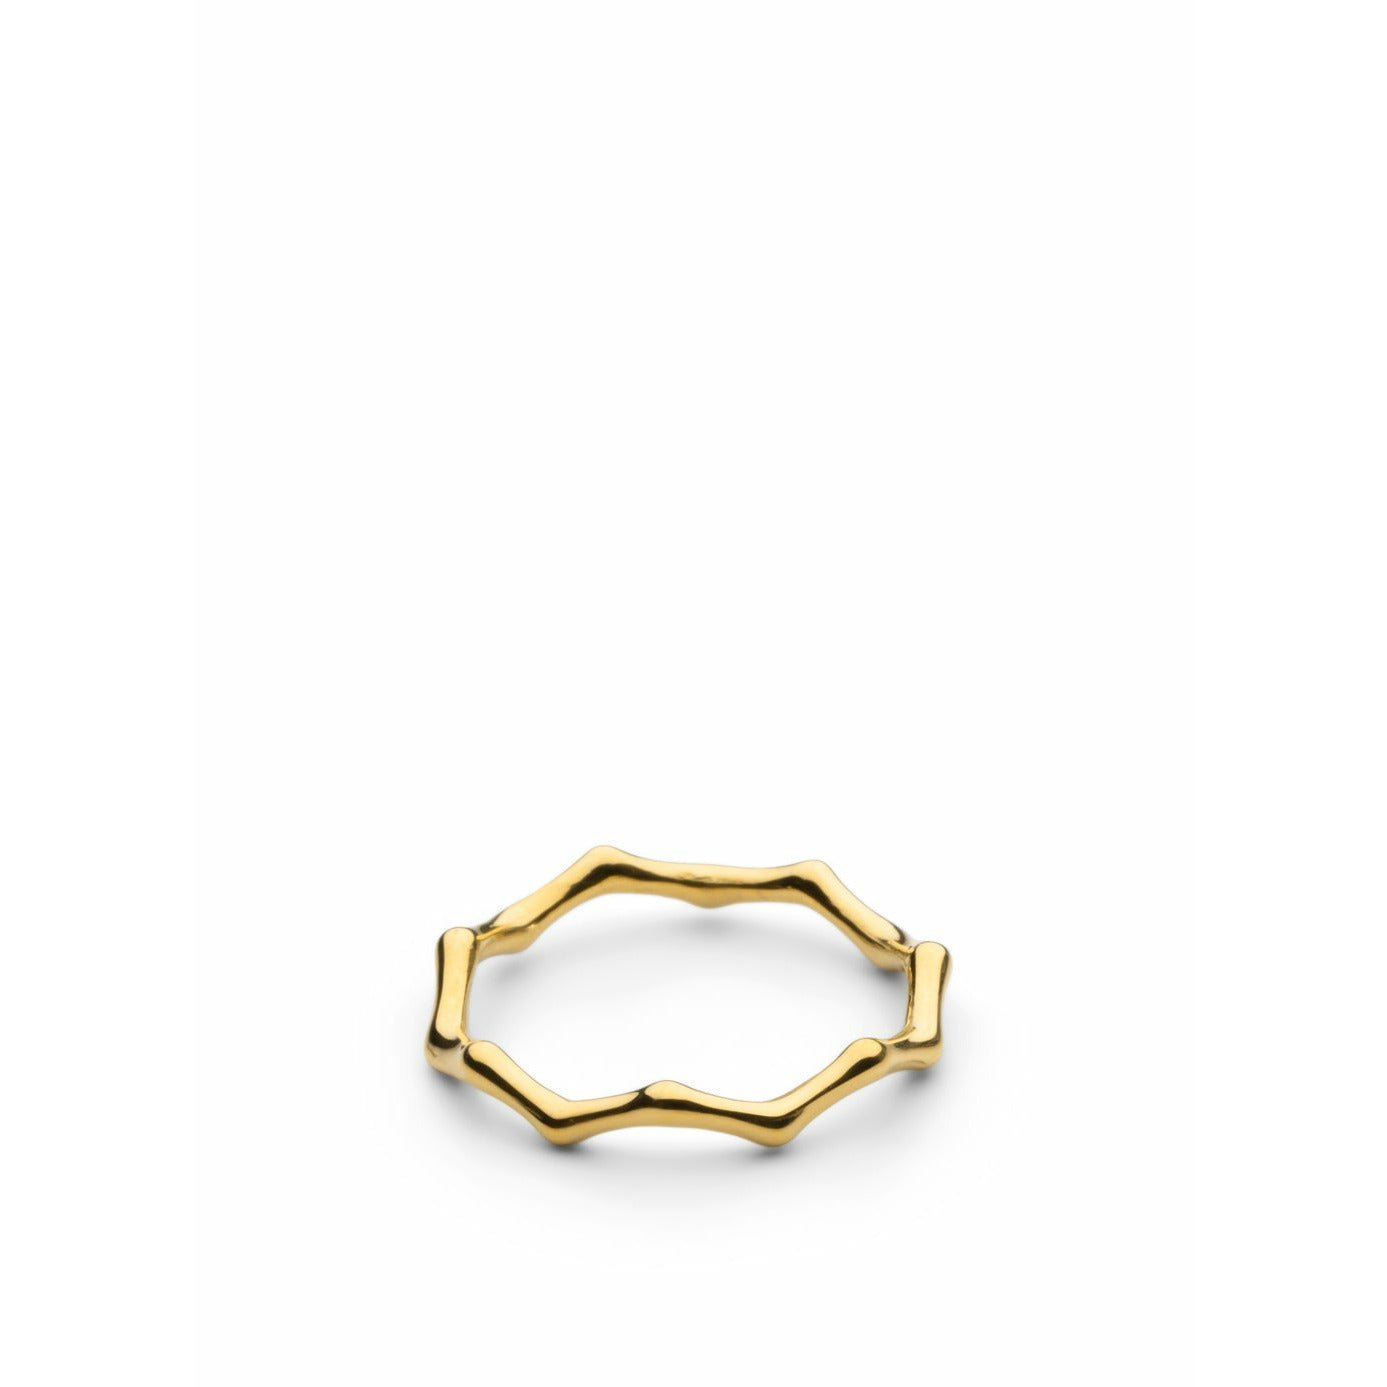 Skultuna Bambou Ring Small Gold Plated, ø1,6 Cm